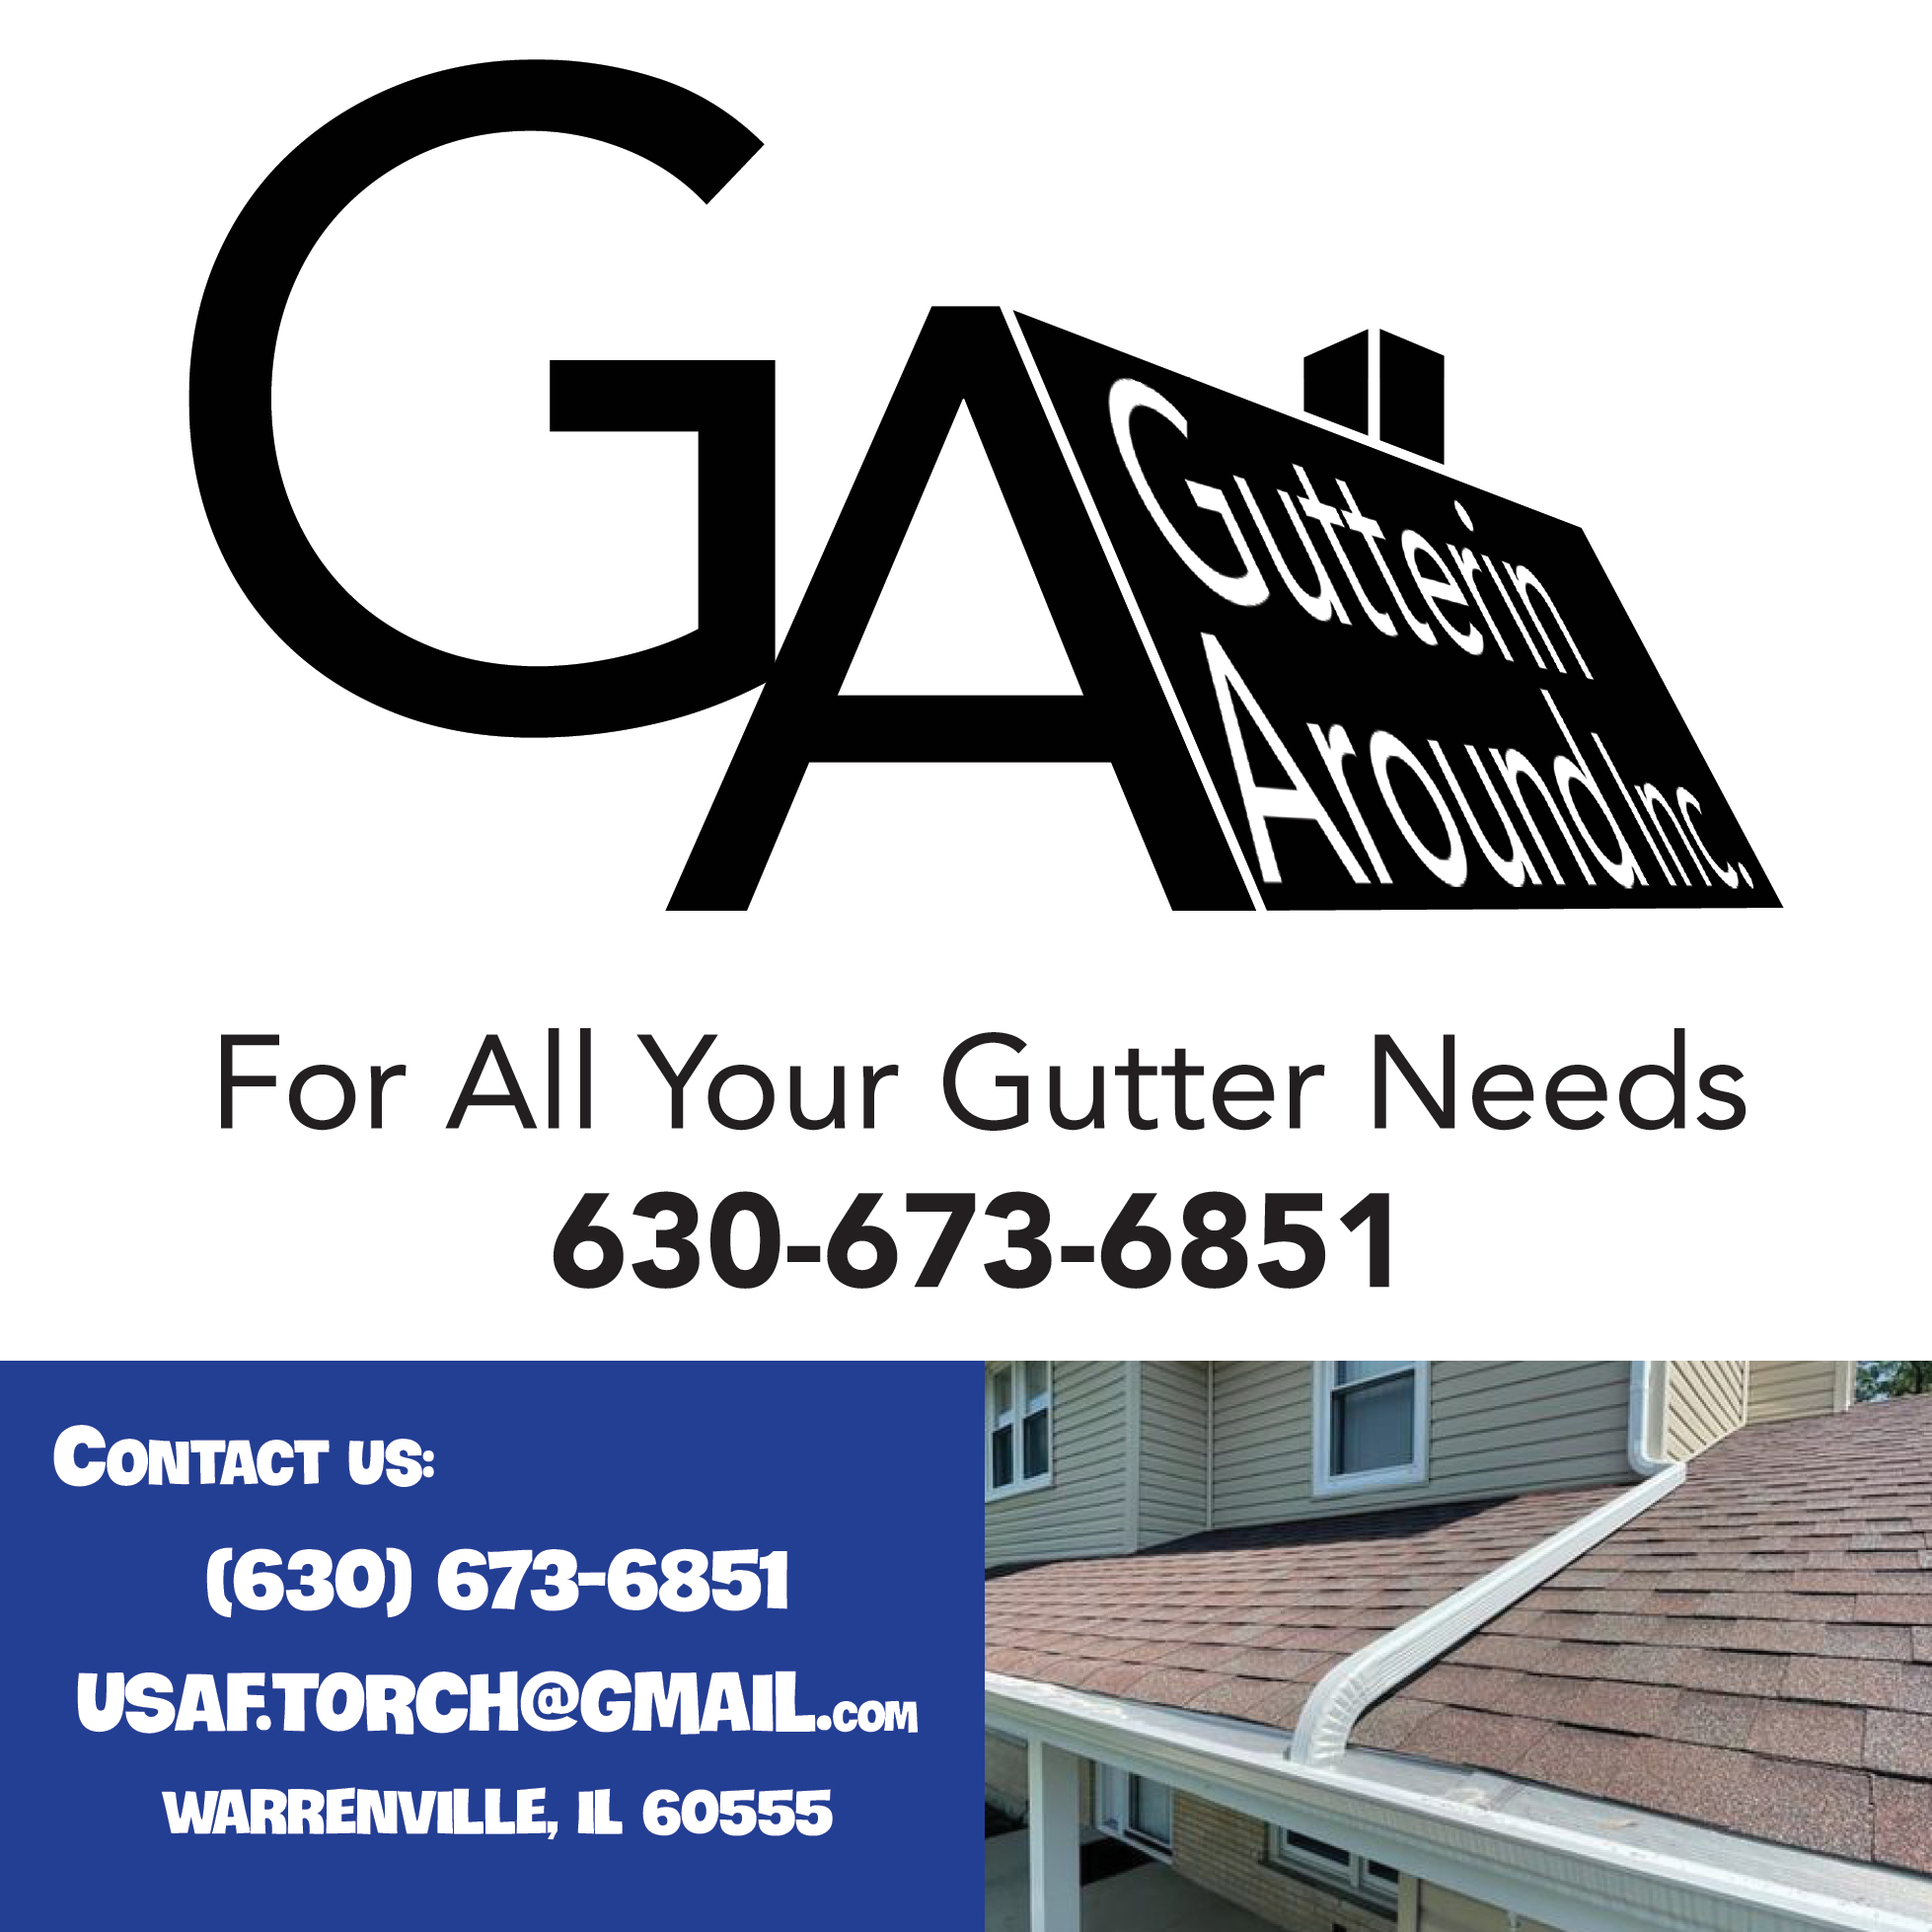 Gutterin Around Warrenville, IL 60555; For All Your Gutter Needs 630-673-6851 Gutter installation, repair, maintenance and cleaning